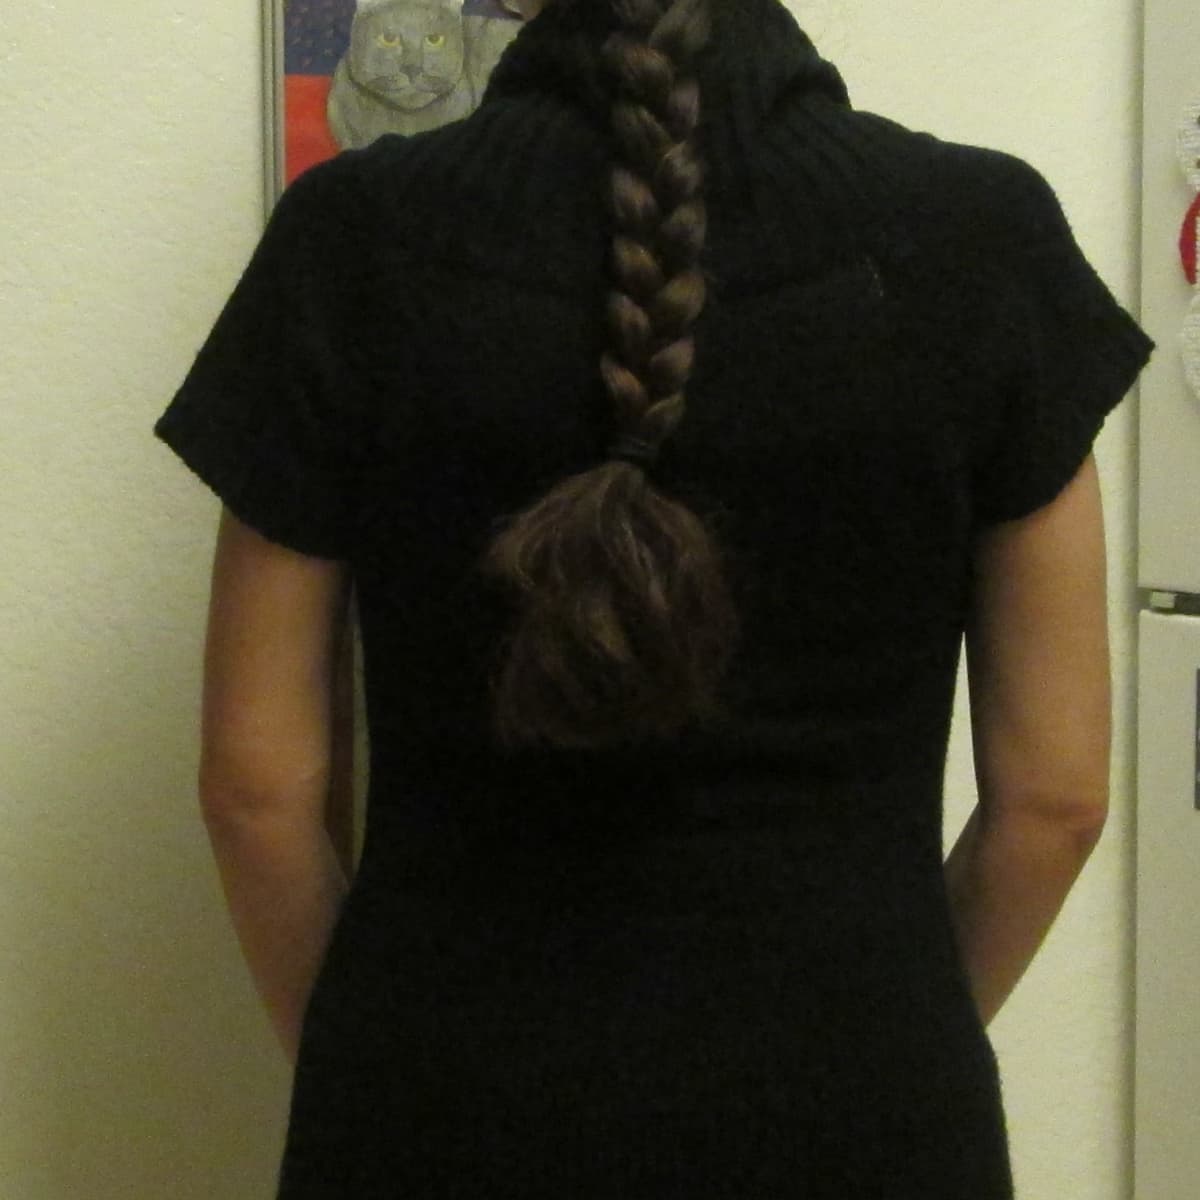 Easy (Wonder Woman Inspired) Knotted Braid - A Beautiful Mess